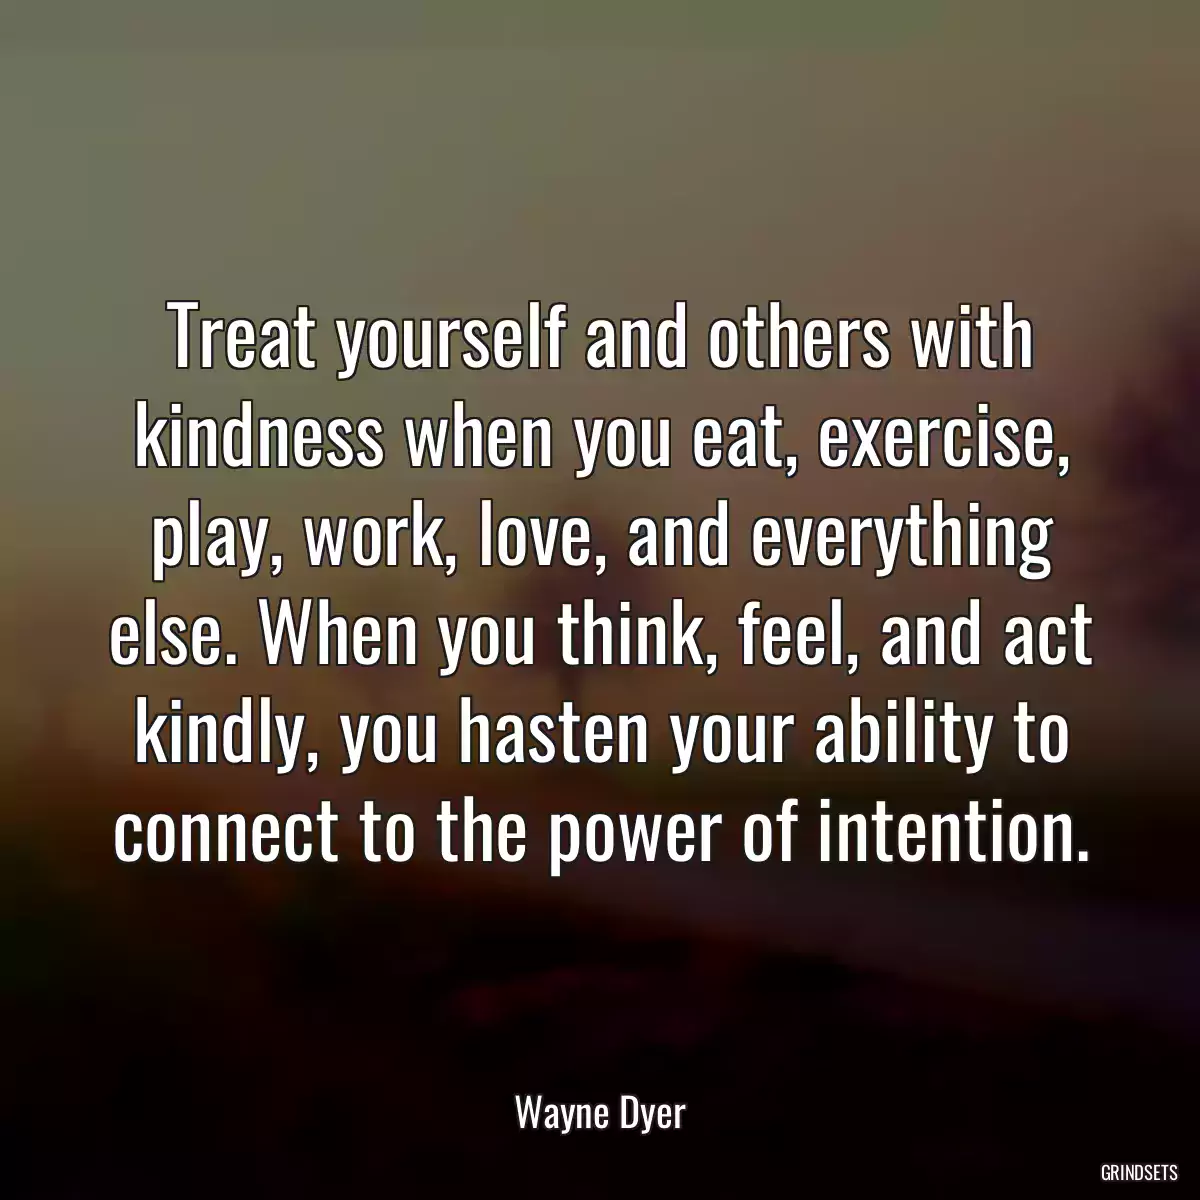 Treat yourself and others with kindness when you eat, exercise, play, work, love, and everything else. When you think, feel, and act kindly, you hasten your ability to connect to the power of intention.